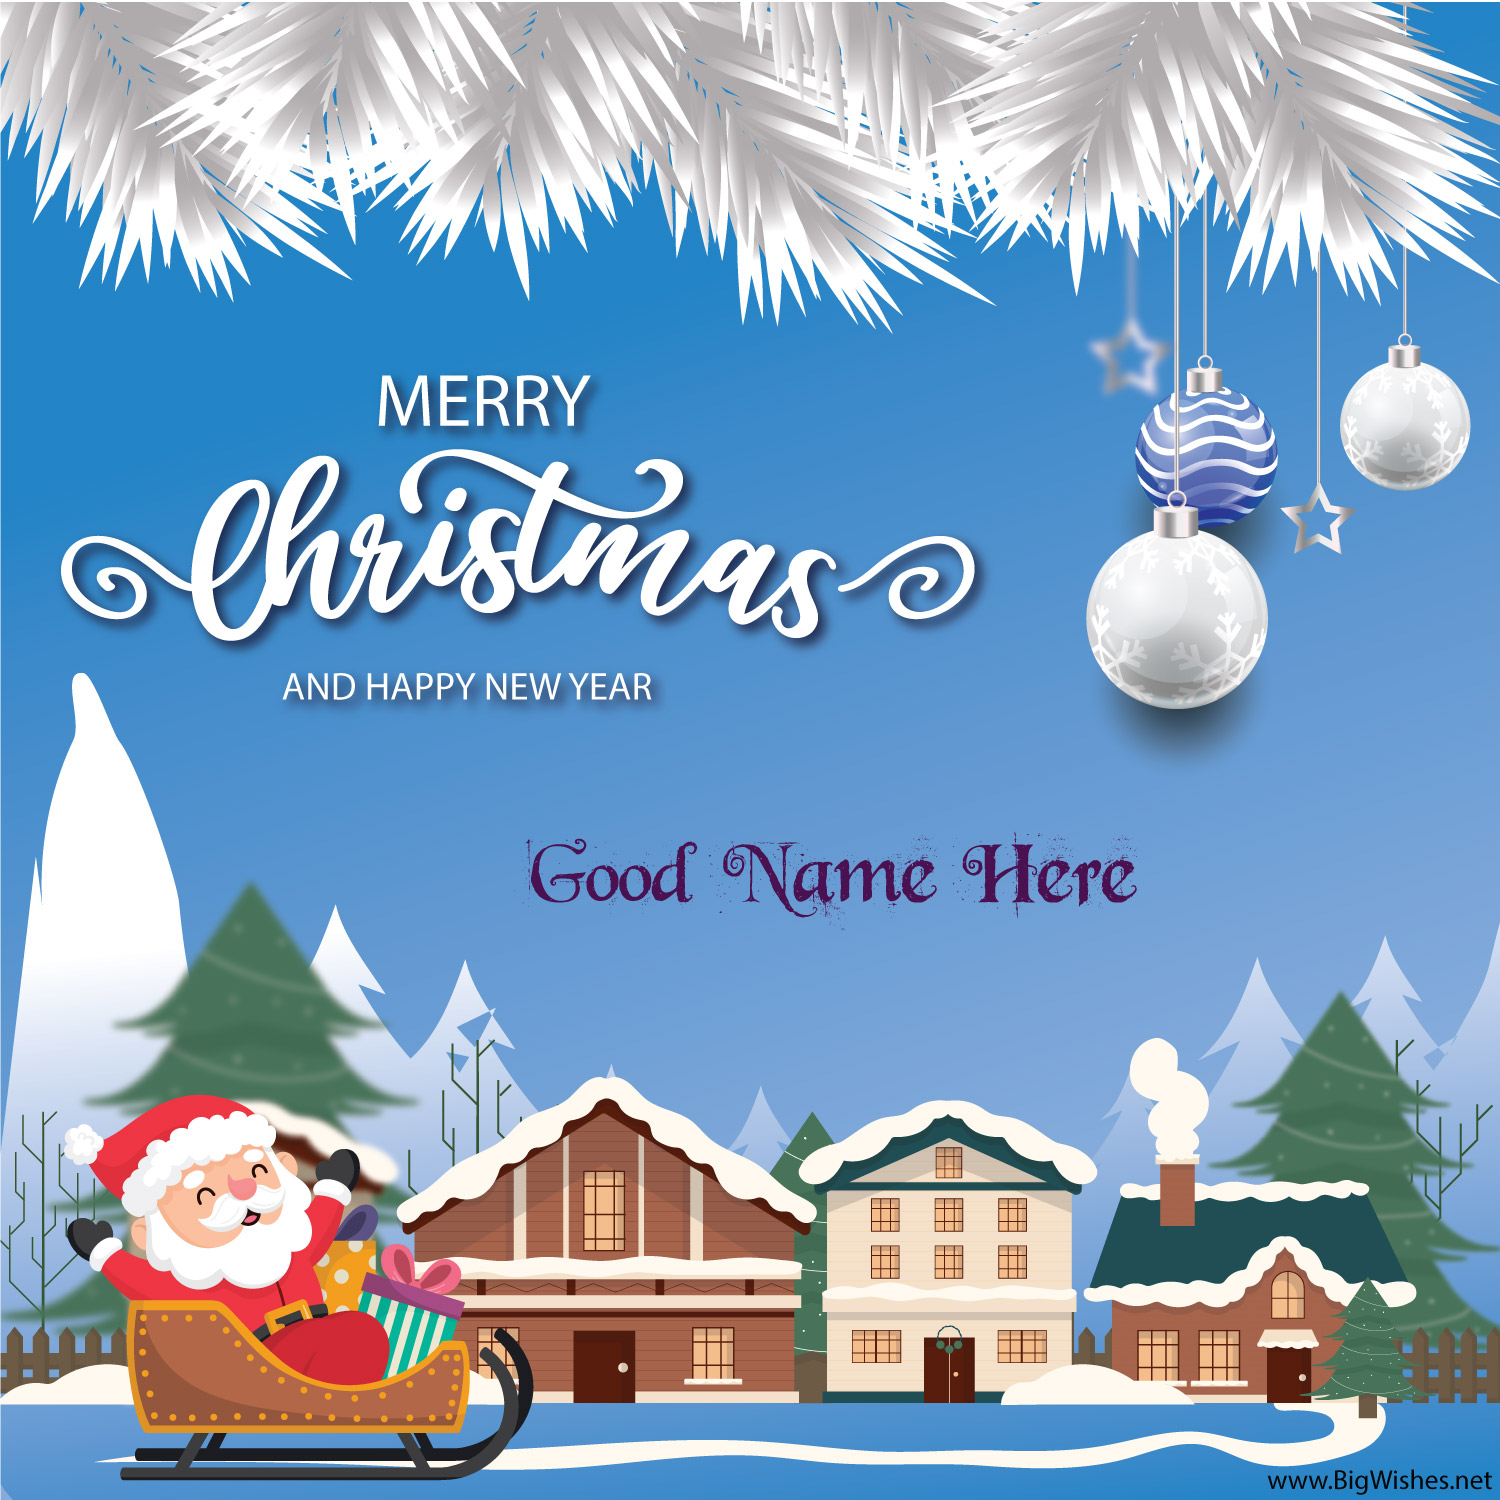 Merry Christmas with Santa Claus Image